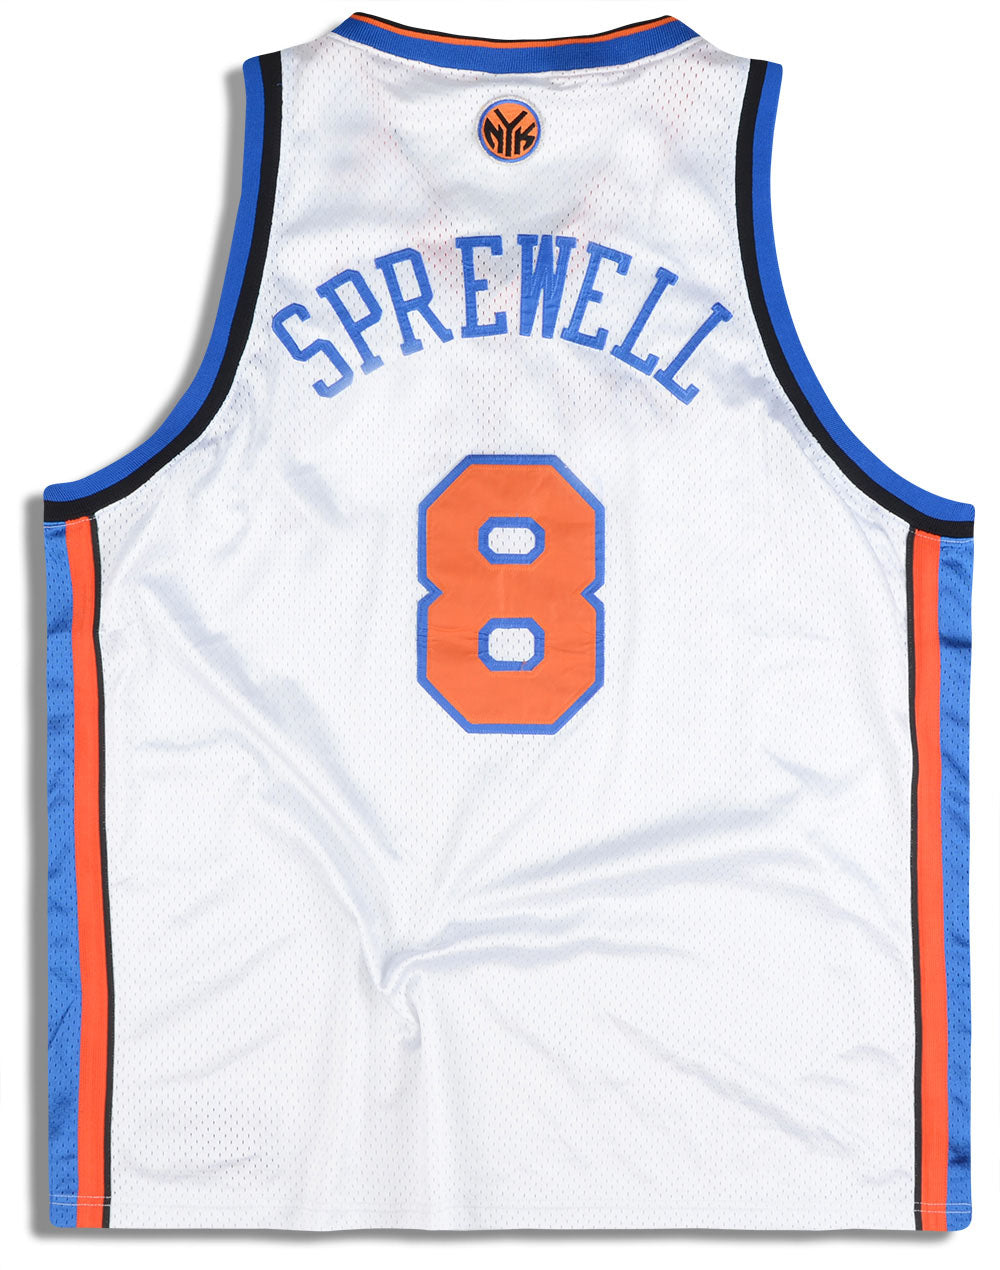 Complete NEW YORK KNICKS Outfit Lot W/ Sprewell NBA CHAMPION